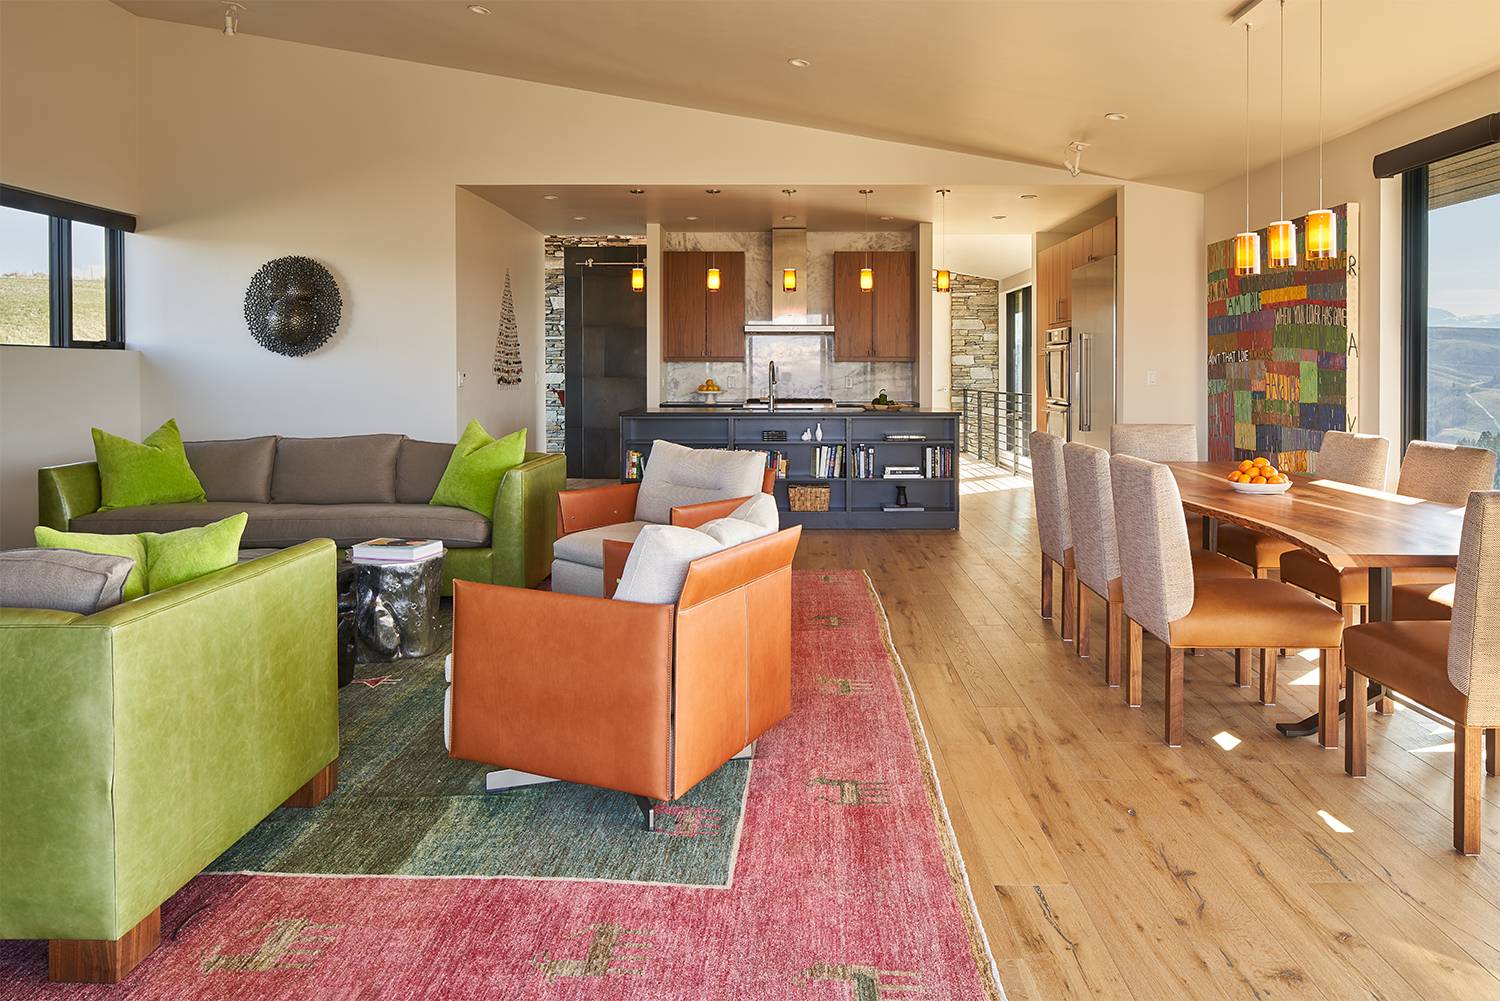 Interior view of the open-plan living room, dining room, and kitchen at Gros Ventre West, a custom home designed and built by Farmer Payne Architects.